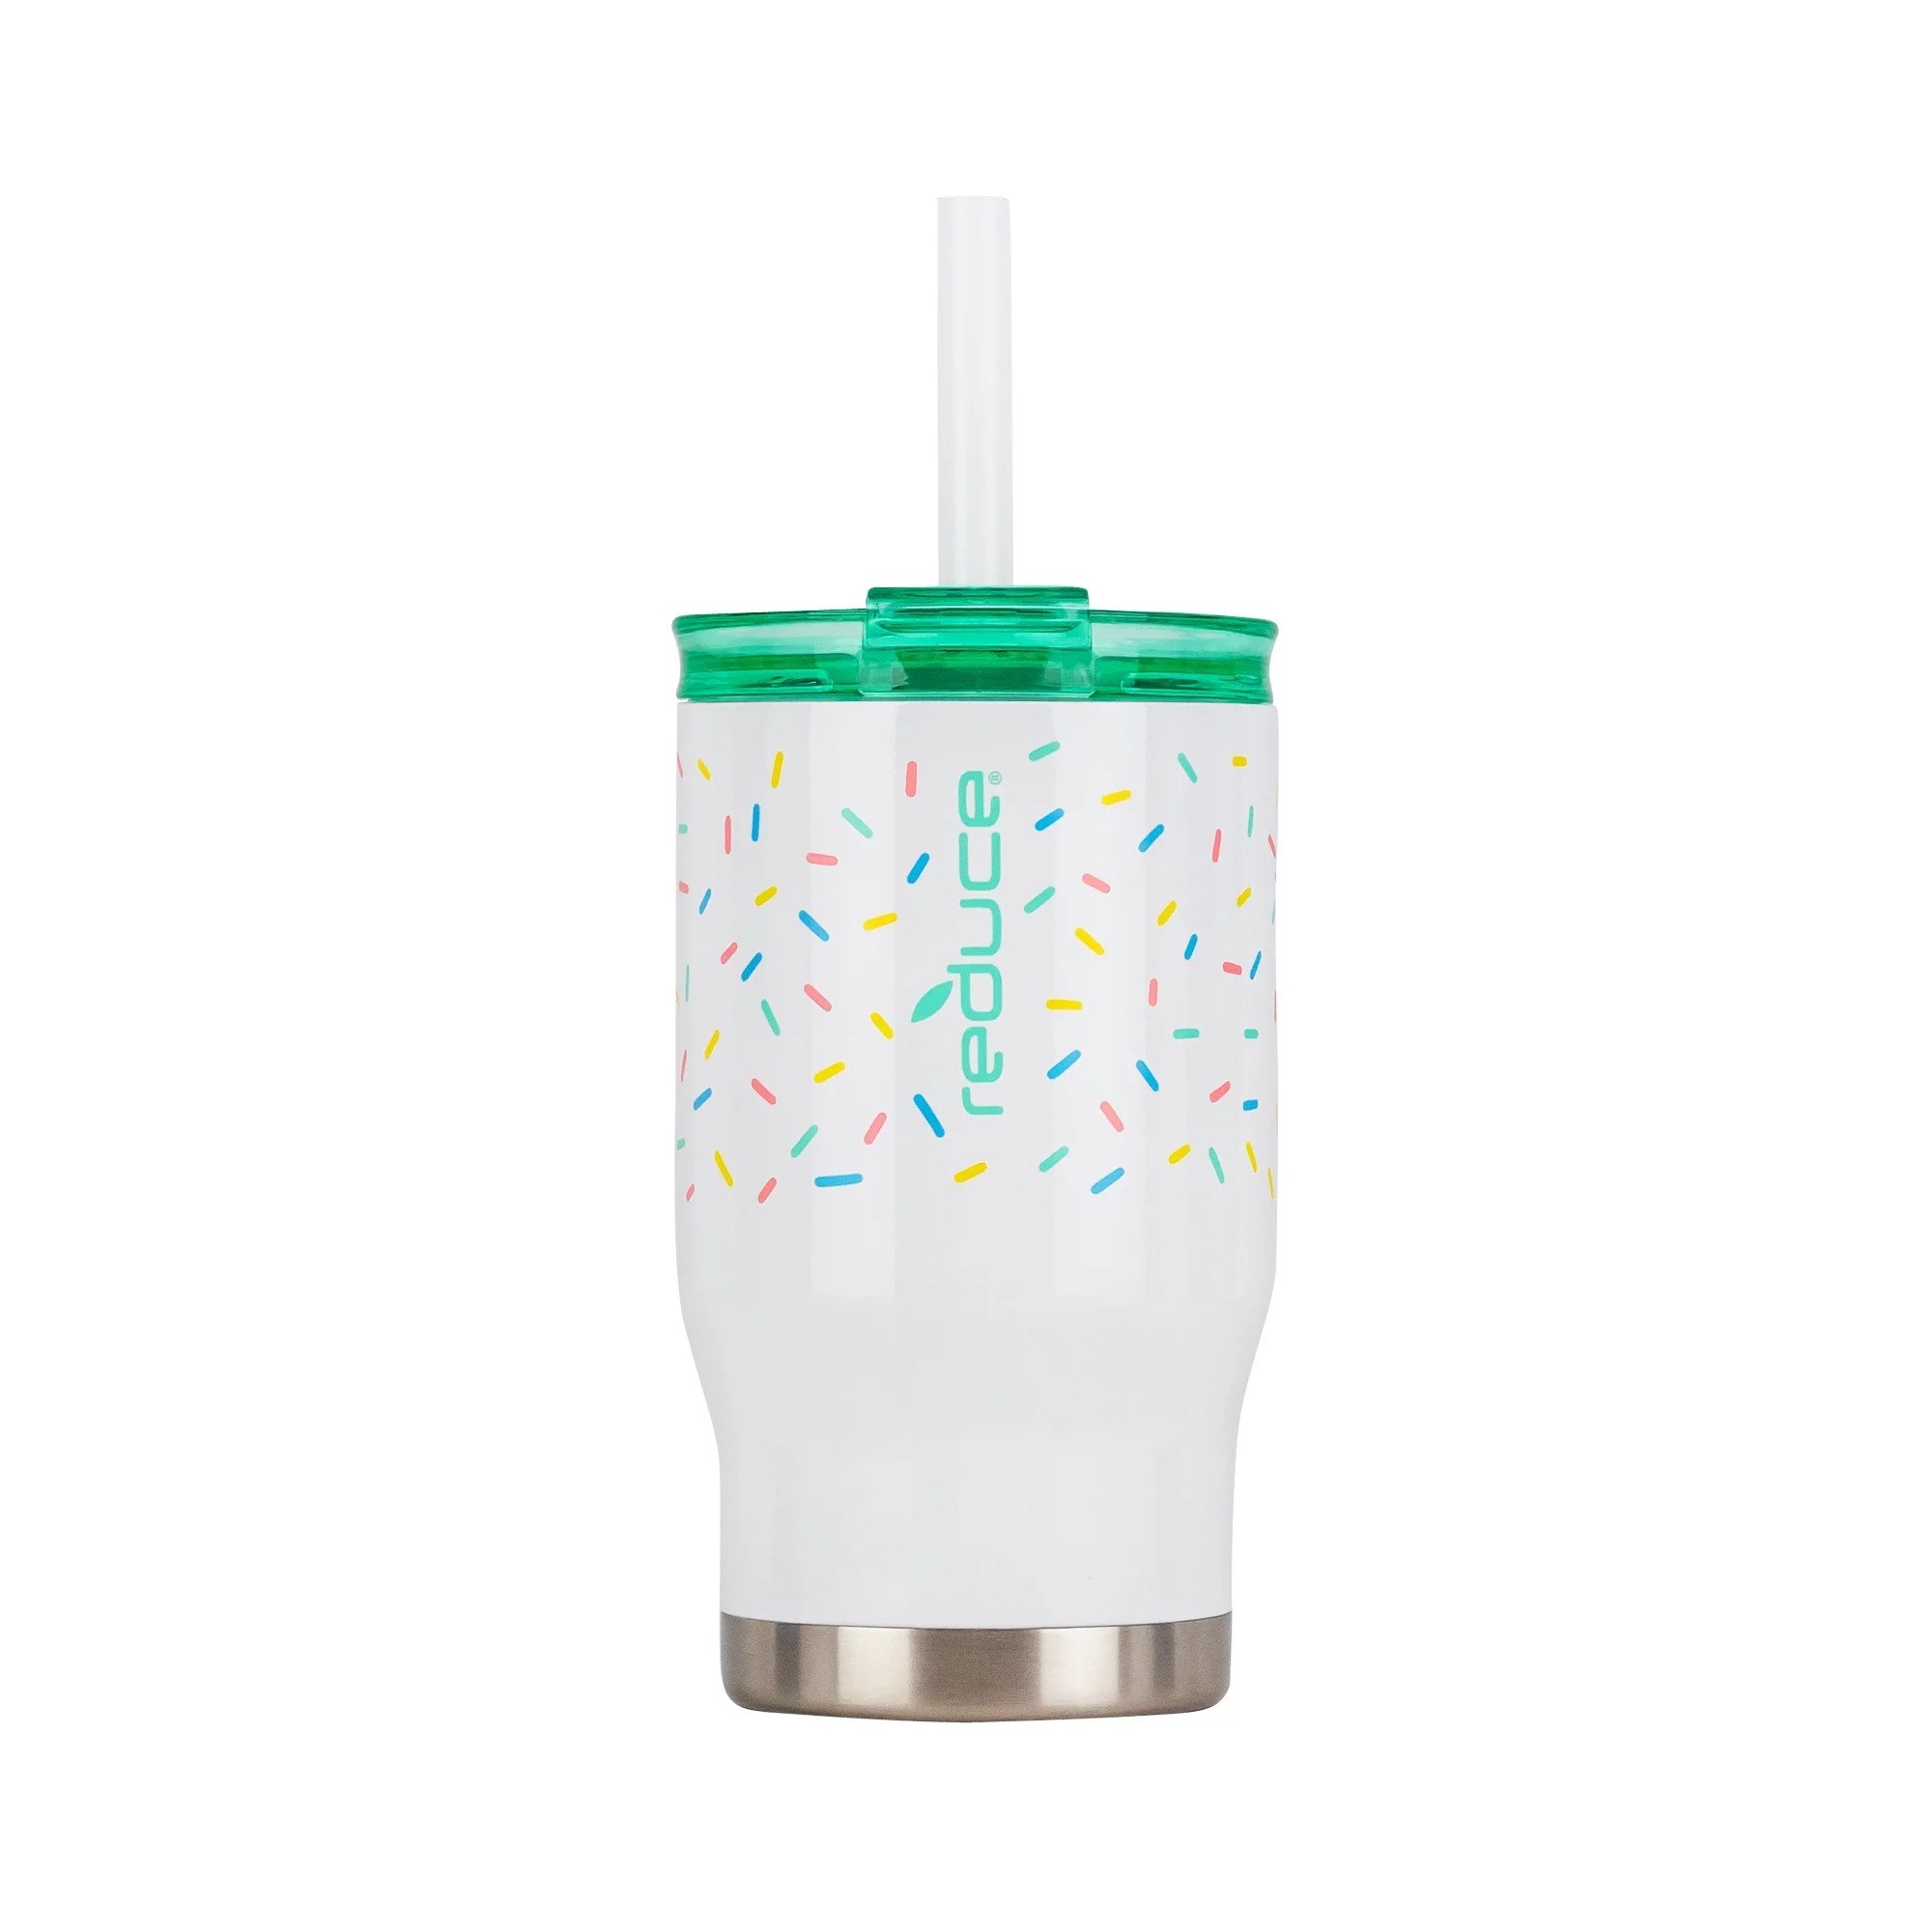 the white and multicolored sprinkle patterned cup